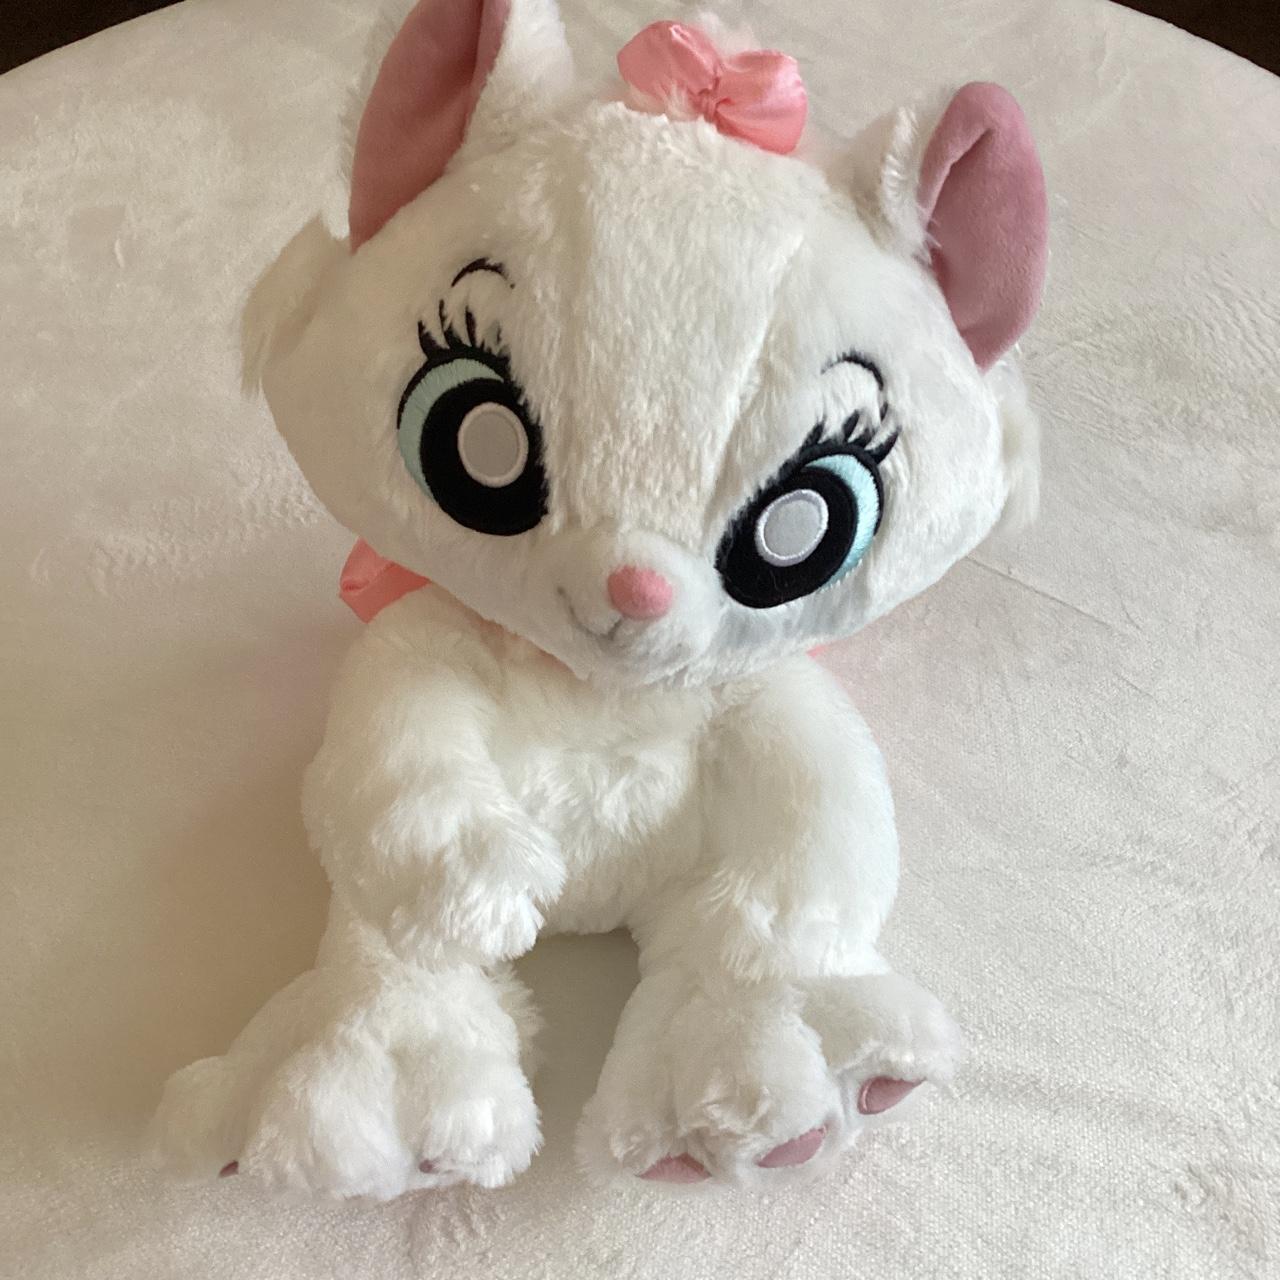 Disney Plush - Babies in a Pouch - Aristocats Marie